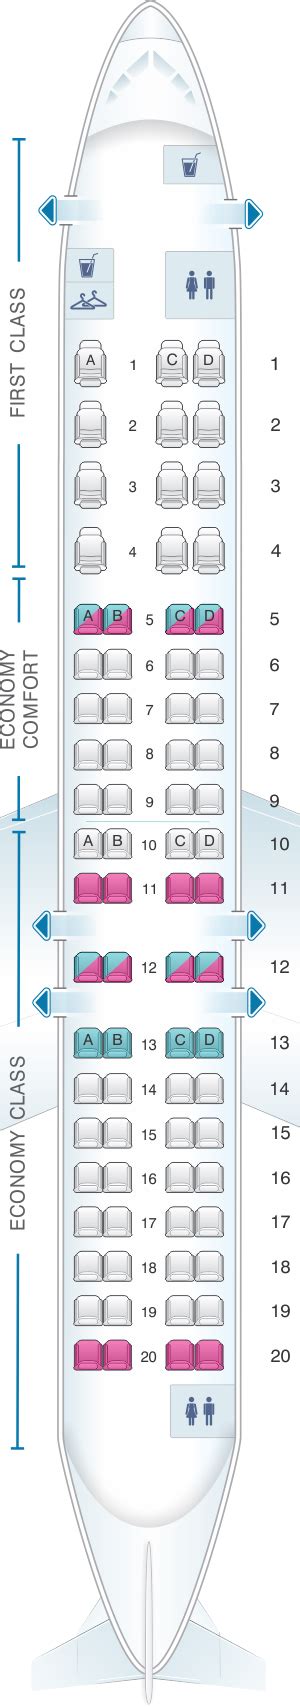 Seats 78. Pitch 35-36". Width 17". Recline 3". When you purchase an economy class ticket on CRJ900, it means you are sitting in the main cabin, and not located in first or business class. Seats are smaller and packed more closely together, and in-flight services are limited. Economy class seats on domestic routes usually have a seat pitch .... 